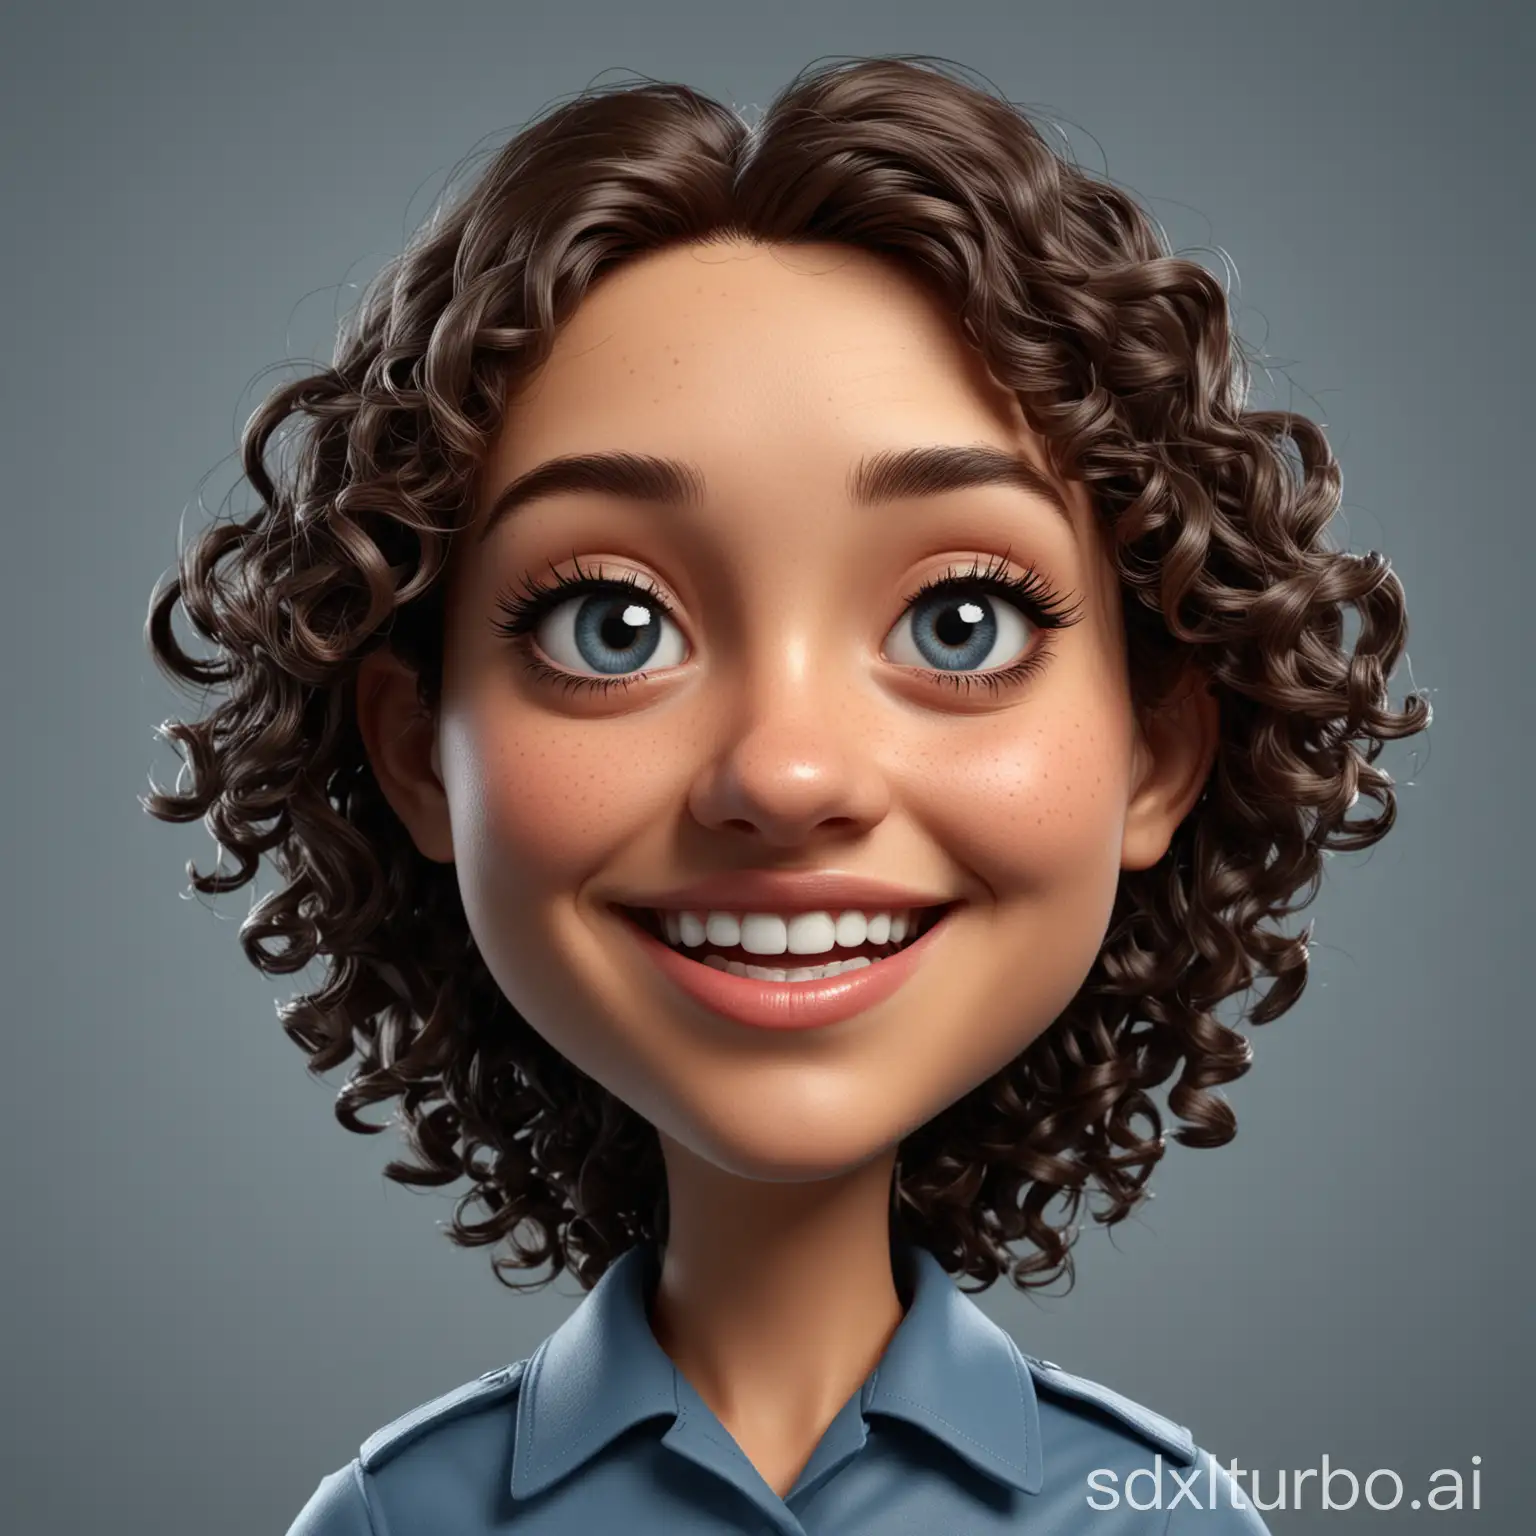 Create a caricature 3D realistic cartoon style full body with a big head. A 25 year old female. Curly long hair, Oval face shape, dark eyes, bottom nose, smile with open mouth. Wearing a uniform with blue color. Face angle 2/3. Grey color background. Use soft lighting photograpy, uhd, hd,20k.